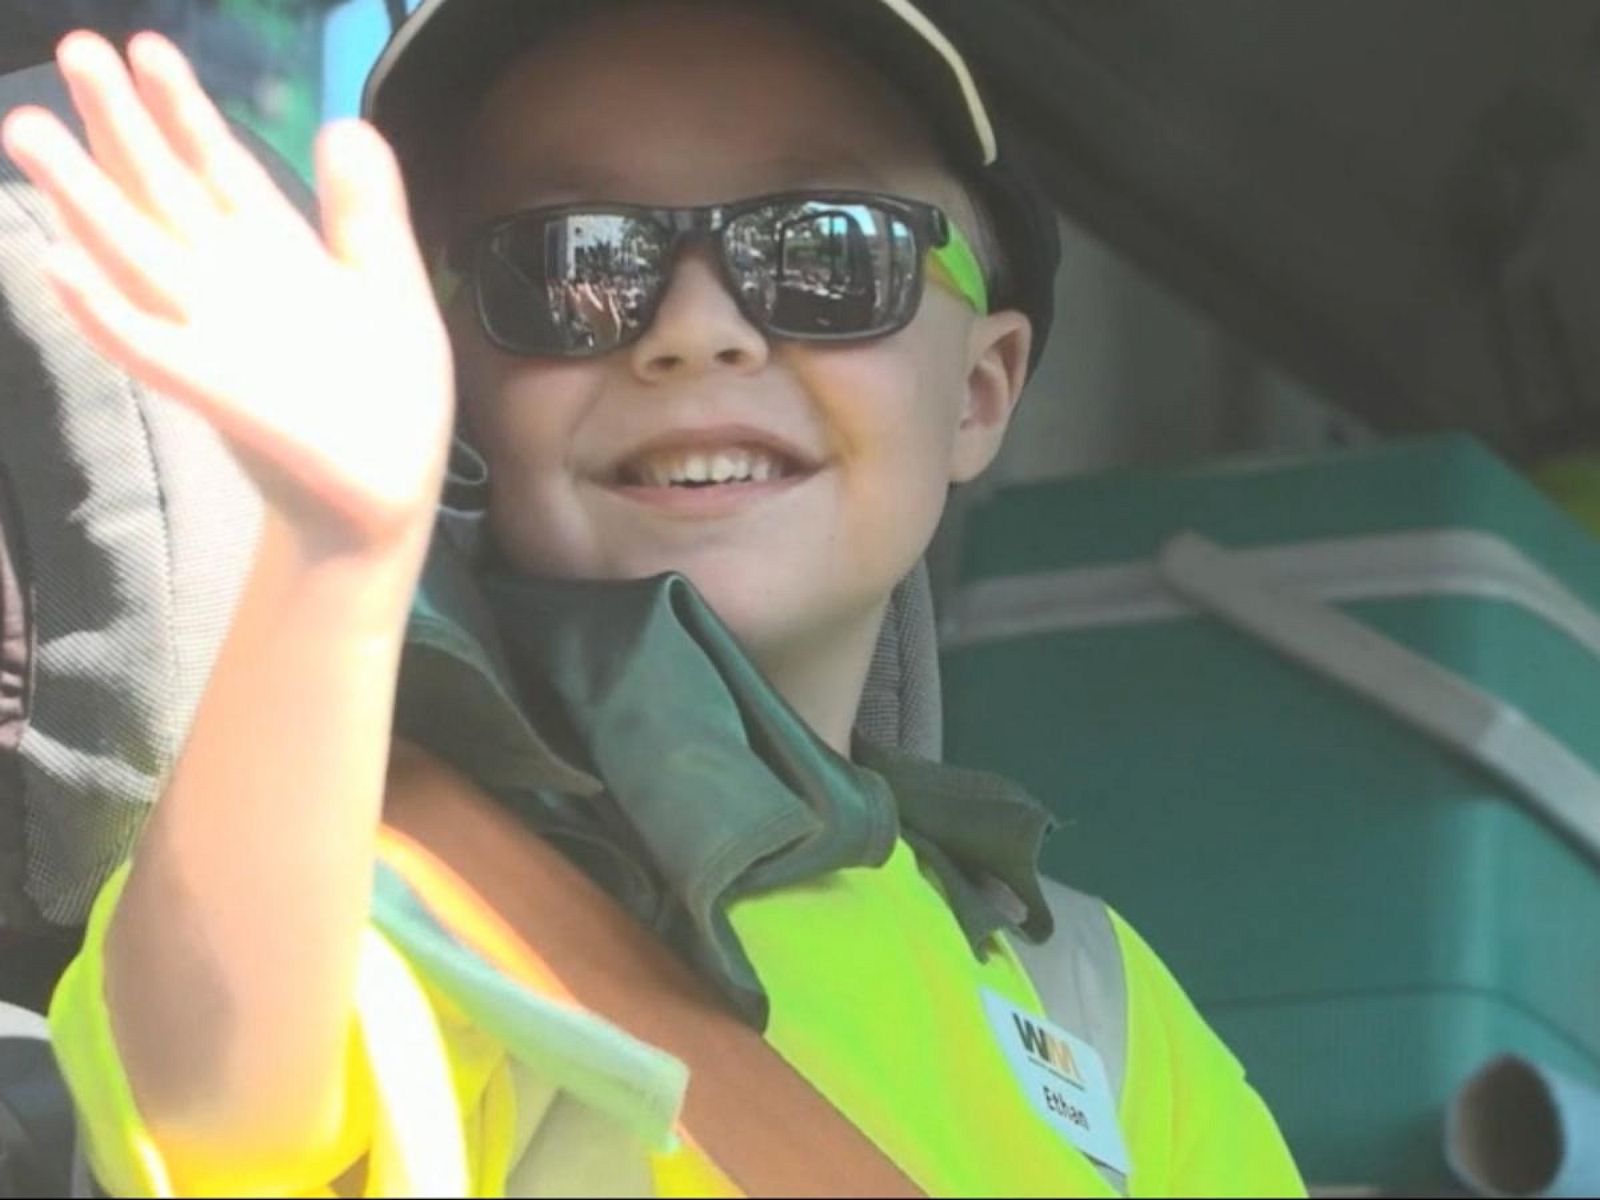 Make-A-Wish Foundation Fulfills Little Boy's Dream to Be a Garbage Man